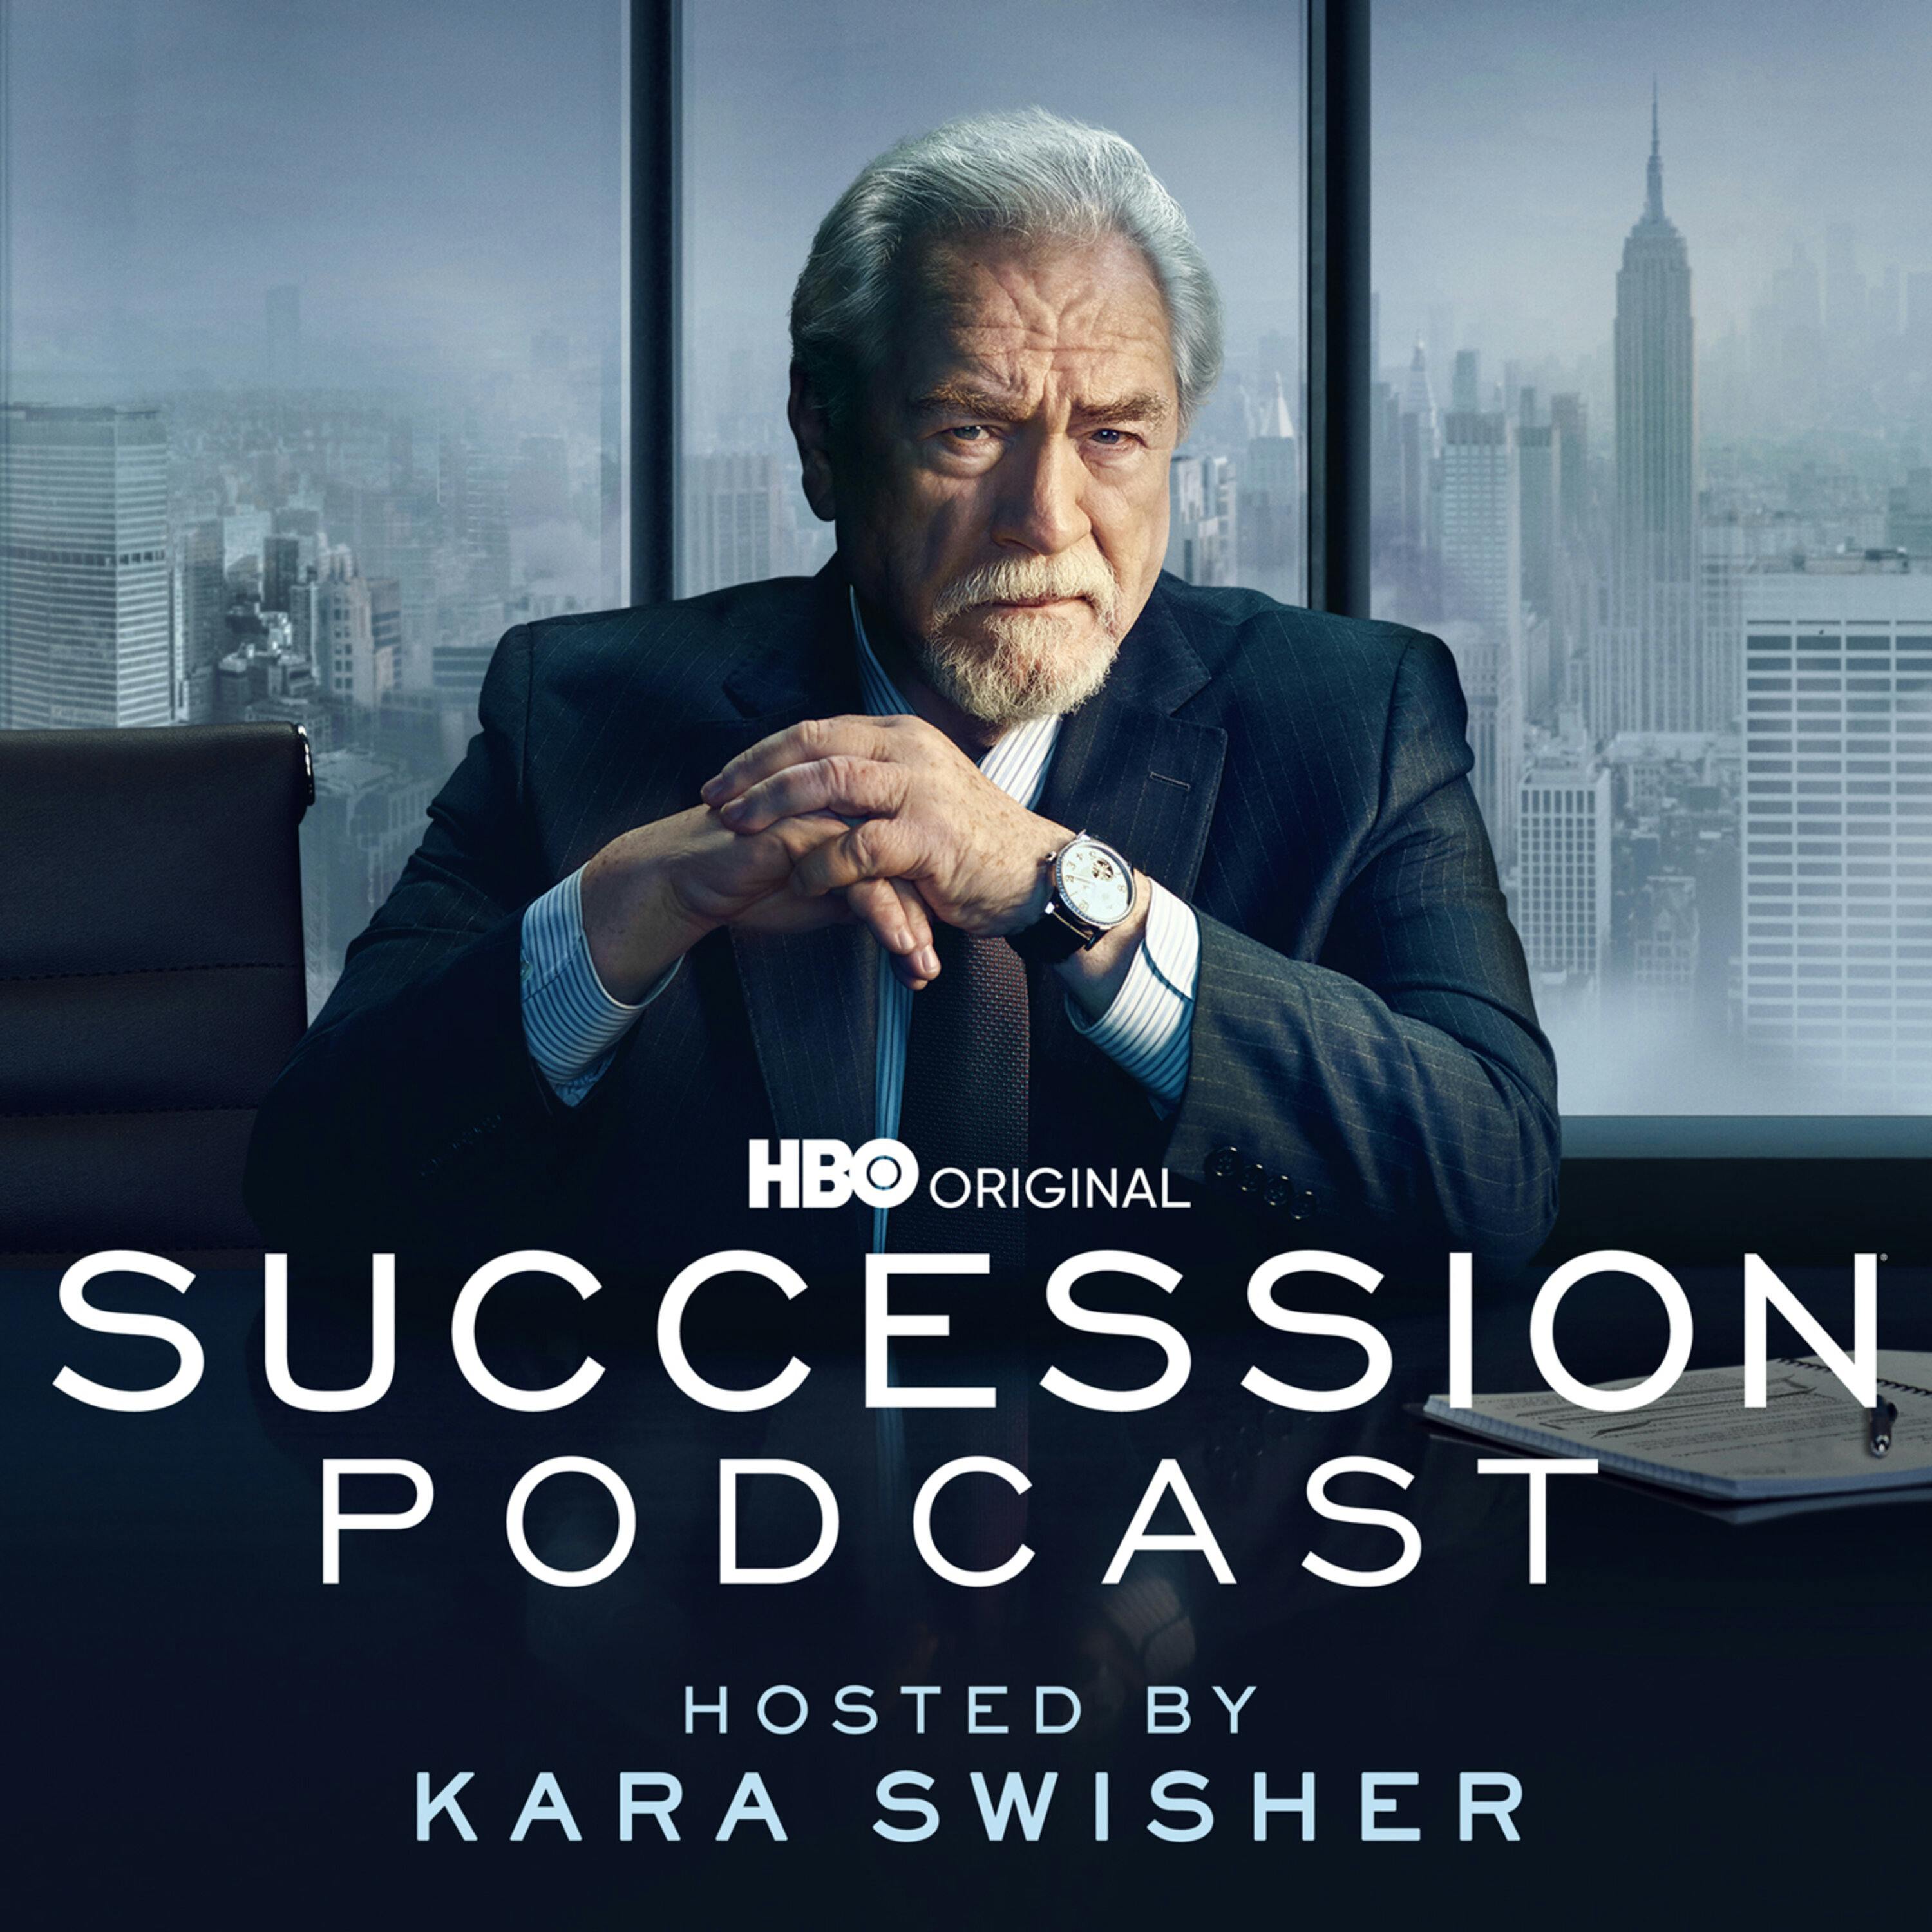 HBO’s Succession Podcast Is Coming July 13